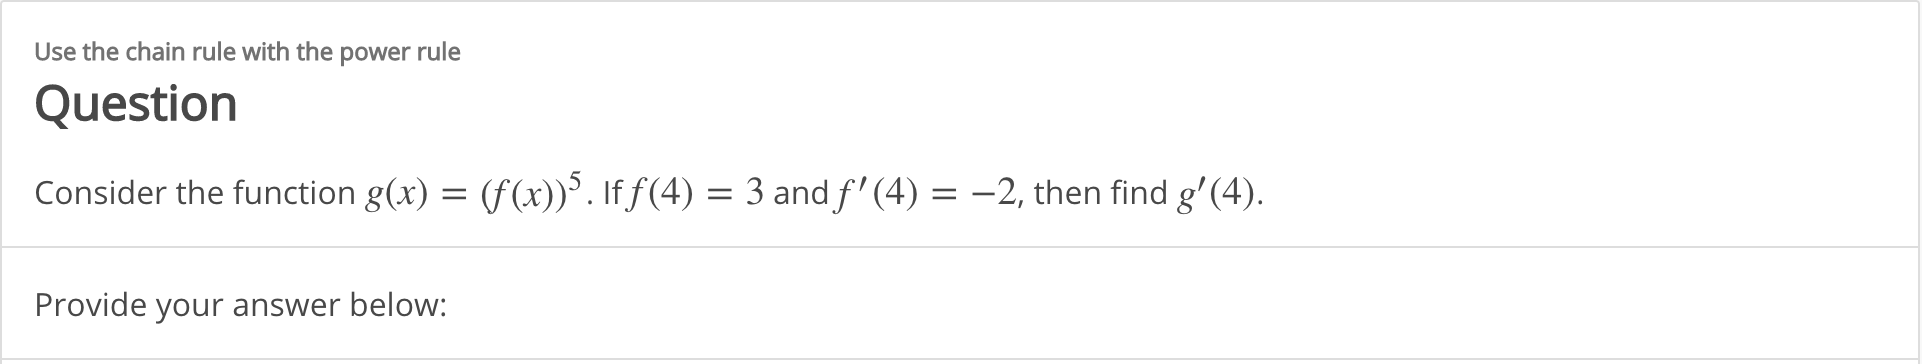 Use the chain rule with the power rule
Question
Consider the function g(x) = (f(x)). If f(4) = 3 and f' (4) = -2, then find g'(4).
Provide your answer below:
